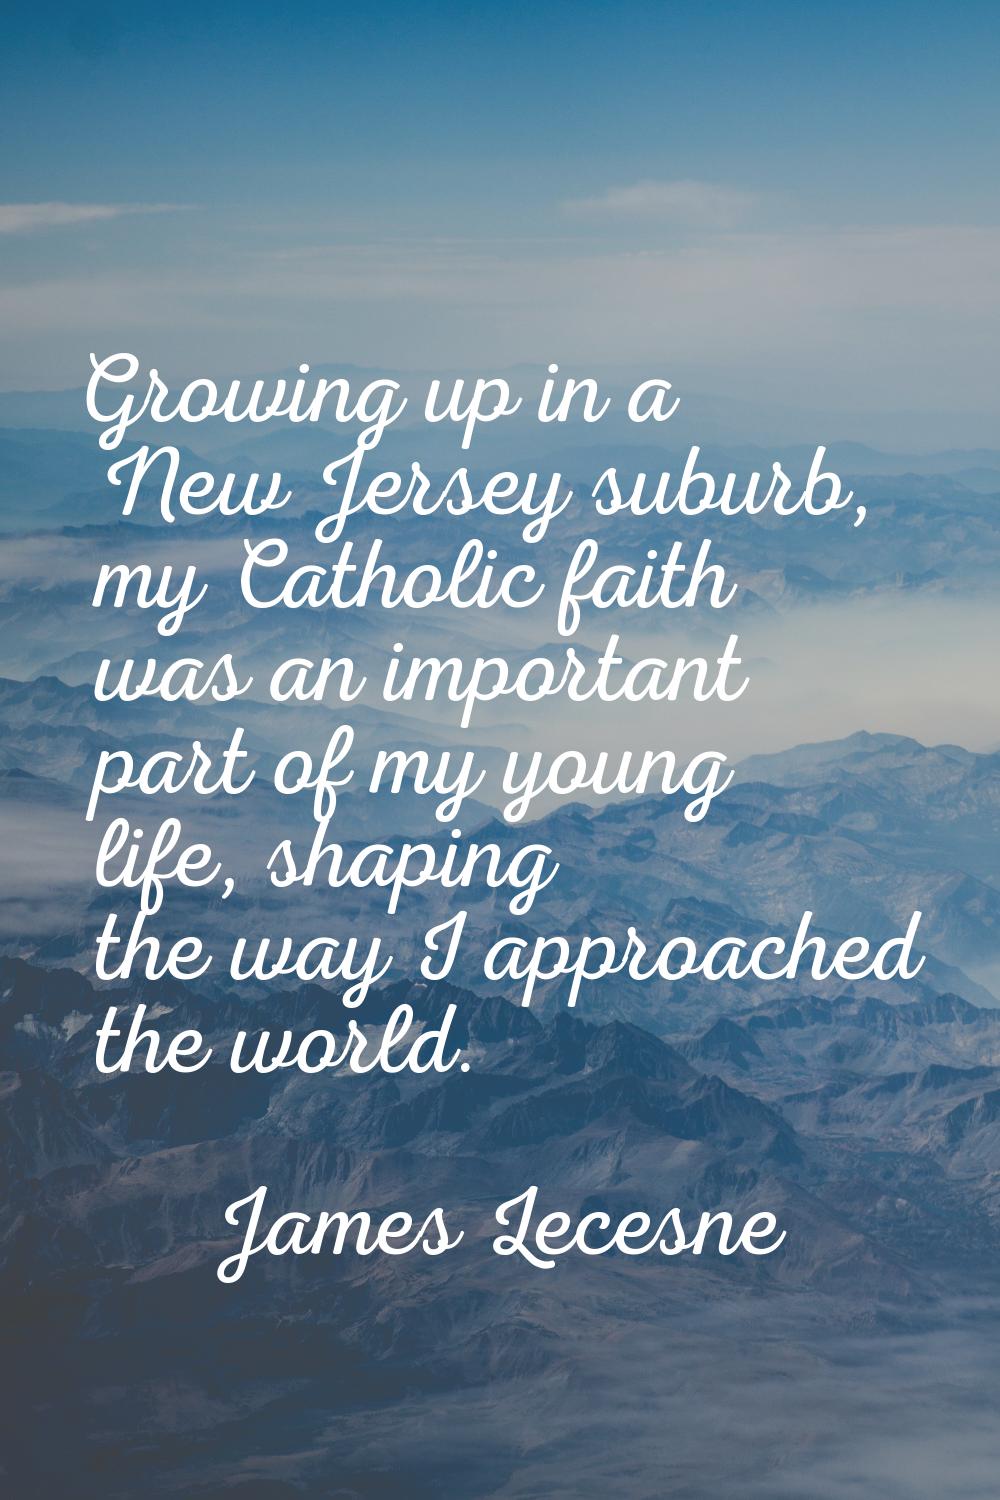 Growing up in a New Jersey suburb, my Catholic faith was an important part of my young life, shapin